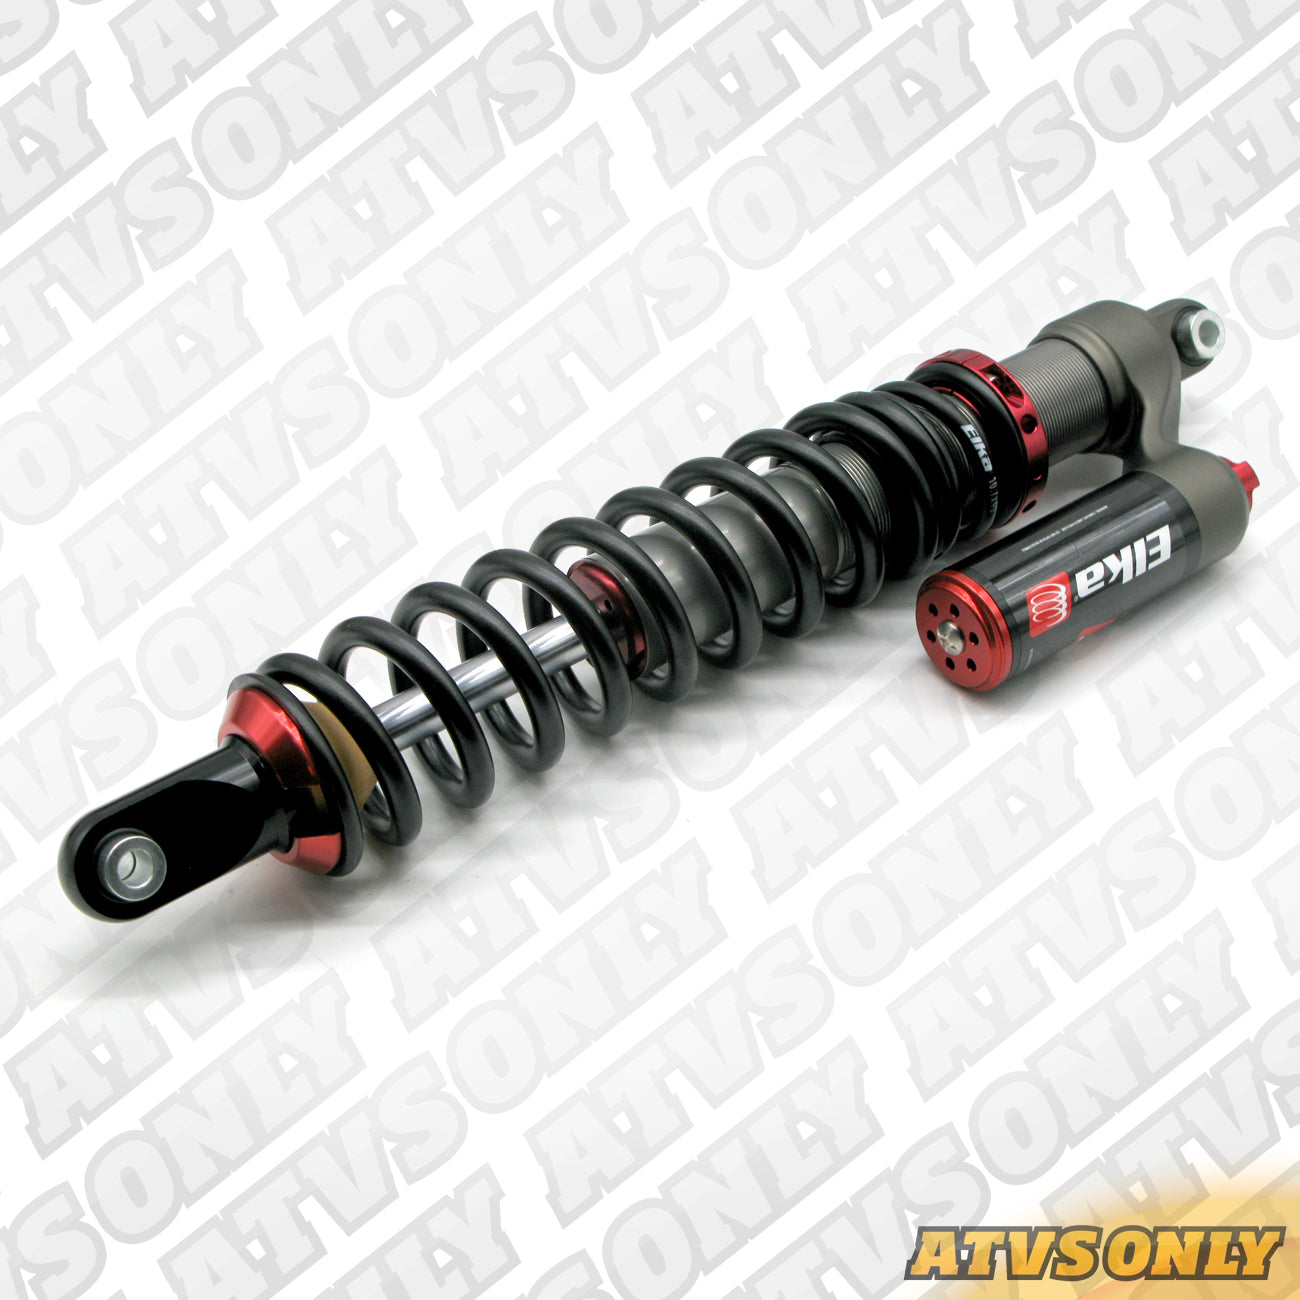 Suspension - Utility Series 3 Shock Absorbers for CanAm Outlander XMR 650/850 ’16-‘18